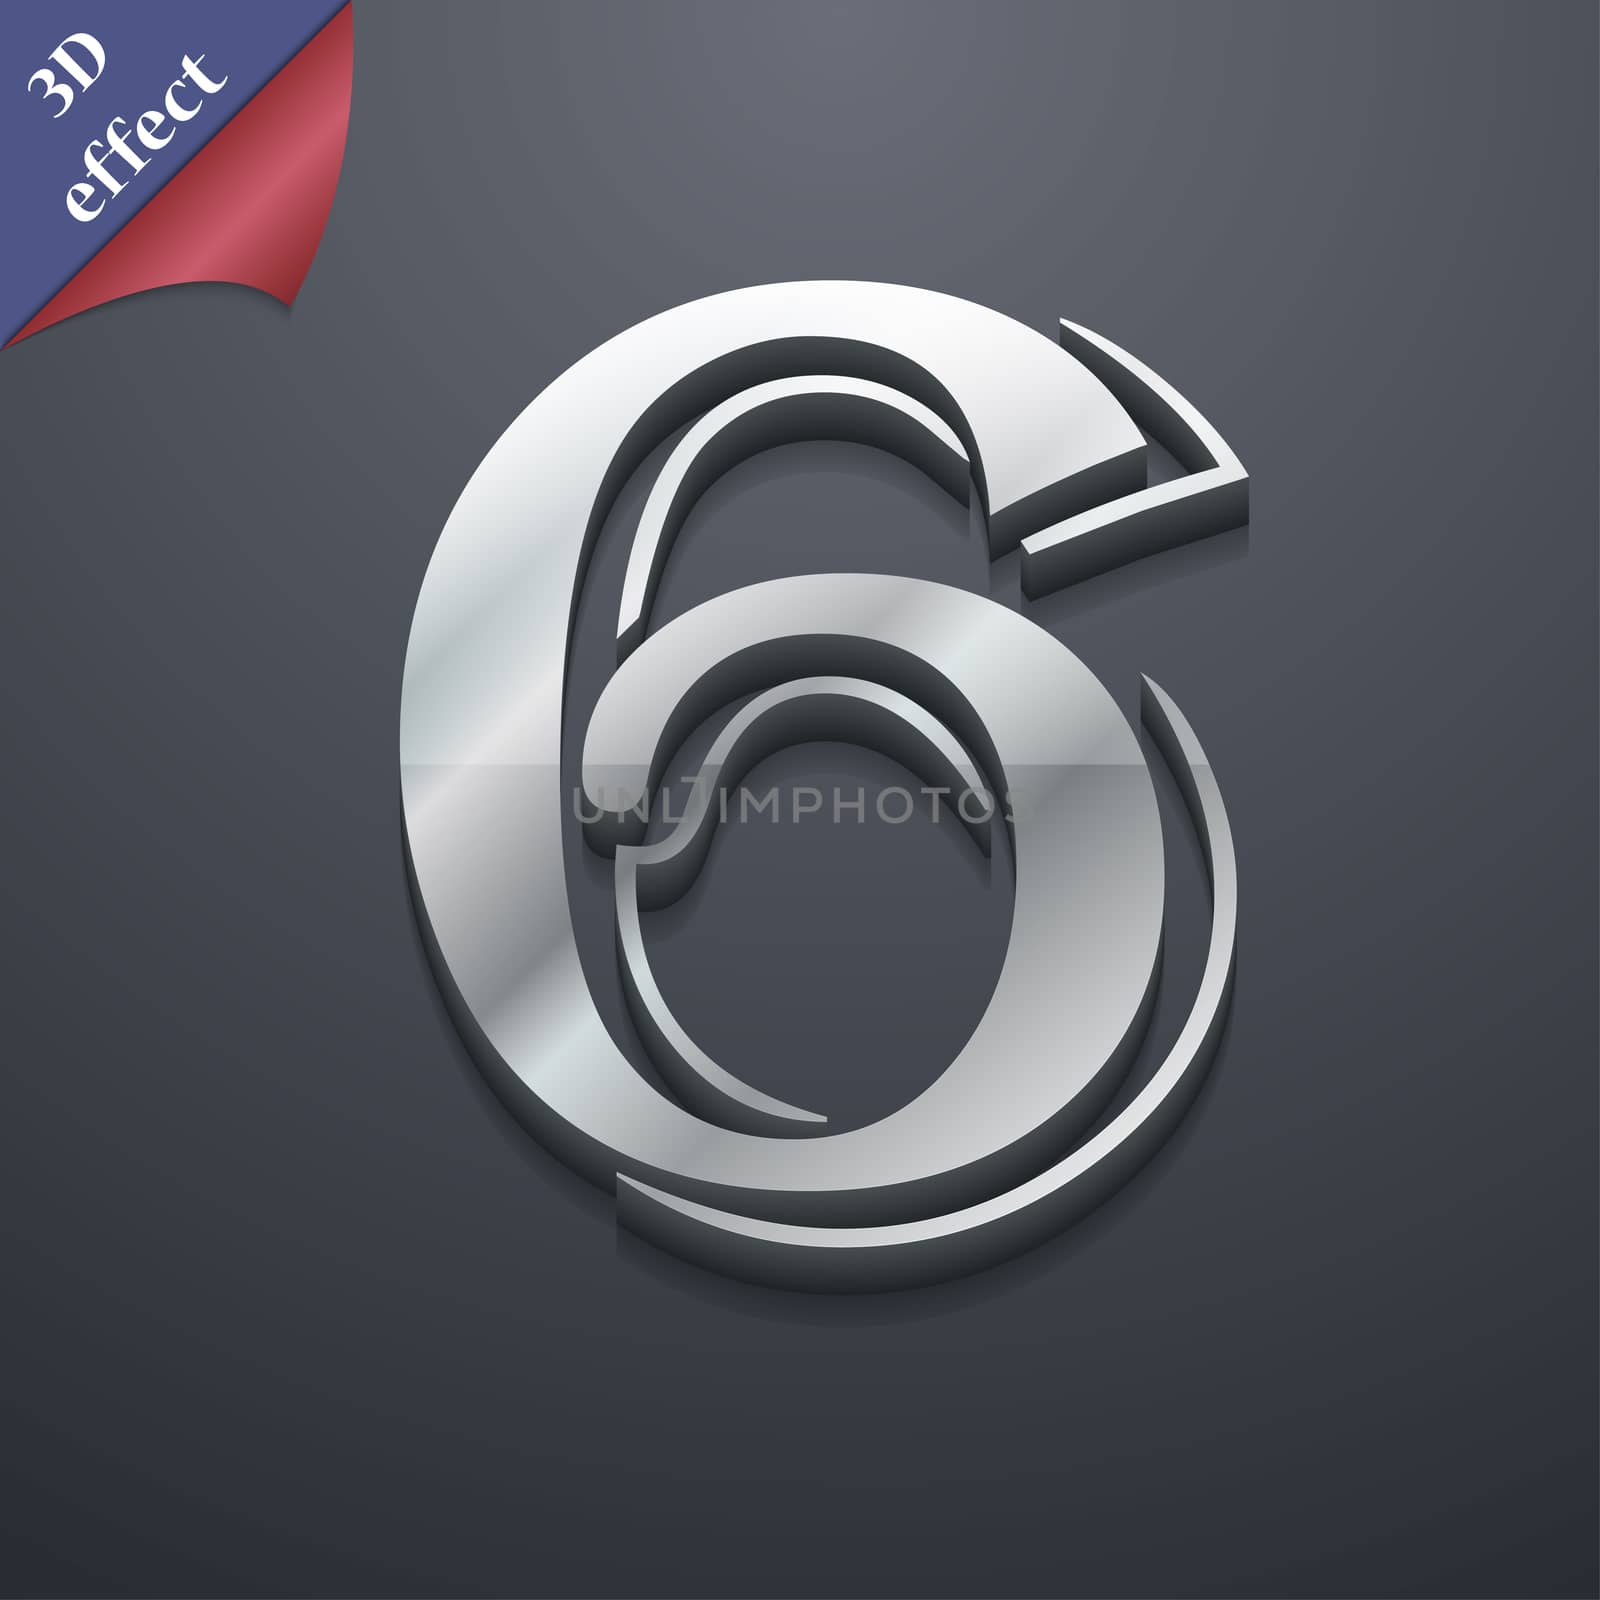 number six icon symbol. 3D style. Trendy, modern design with space for your text illustration. Rastrized copy